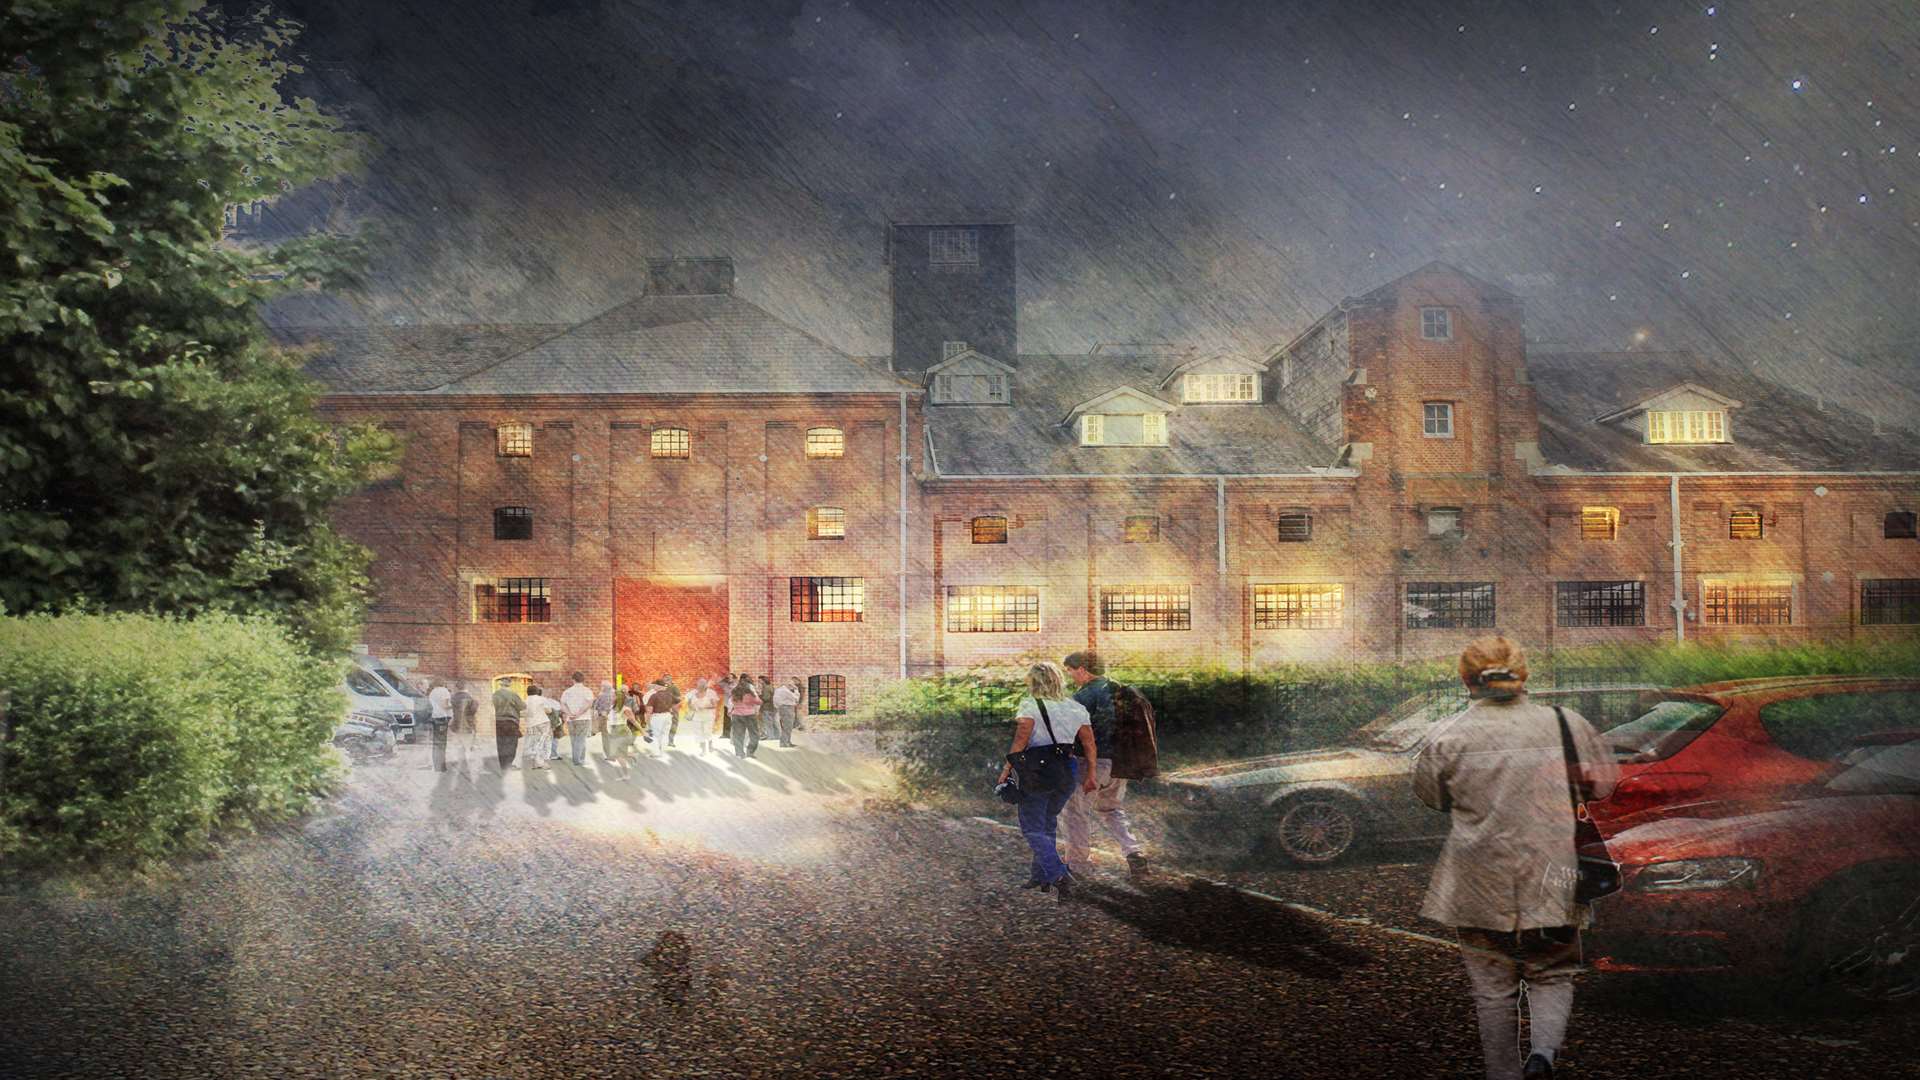 An architect's vision for the Malthouse in Canterbury